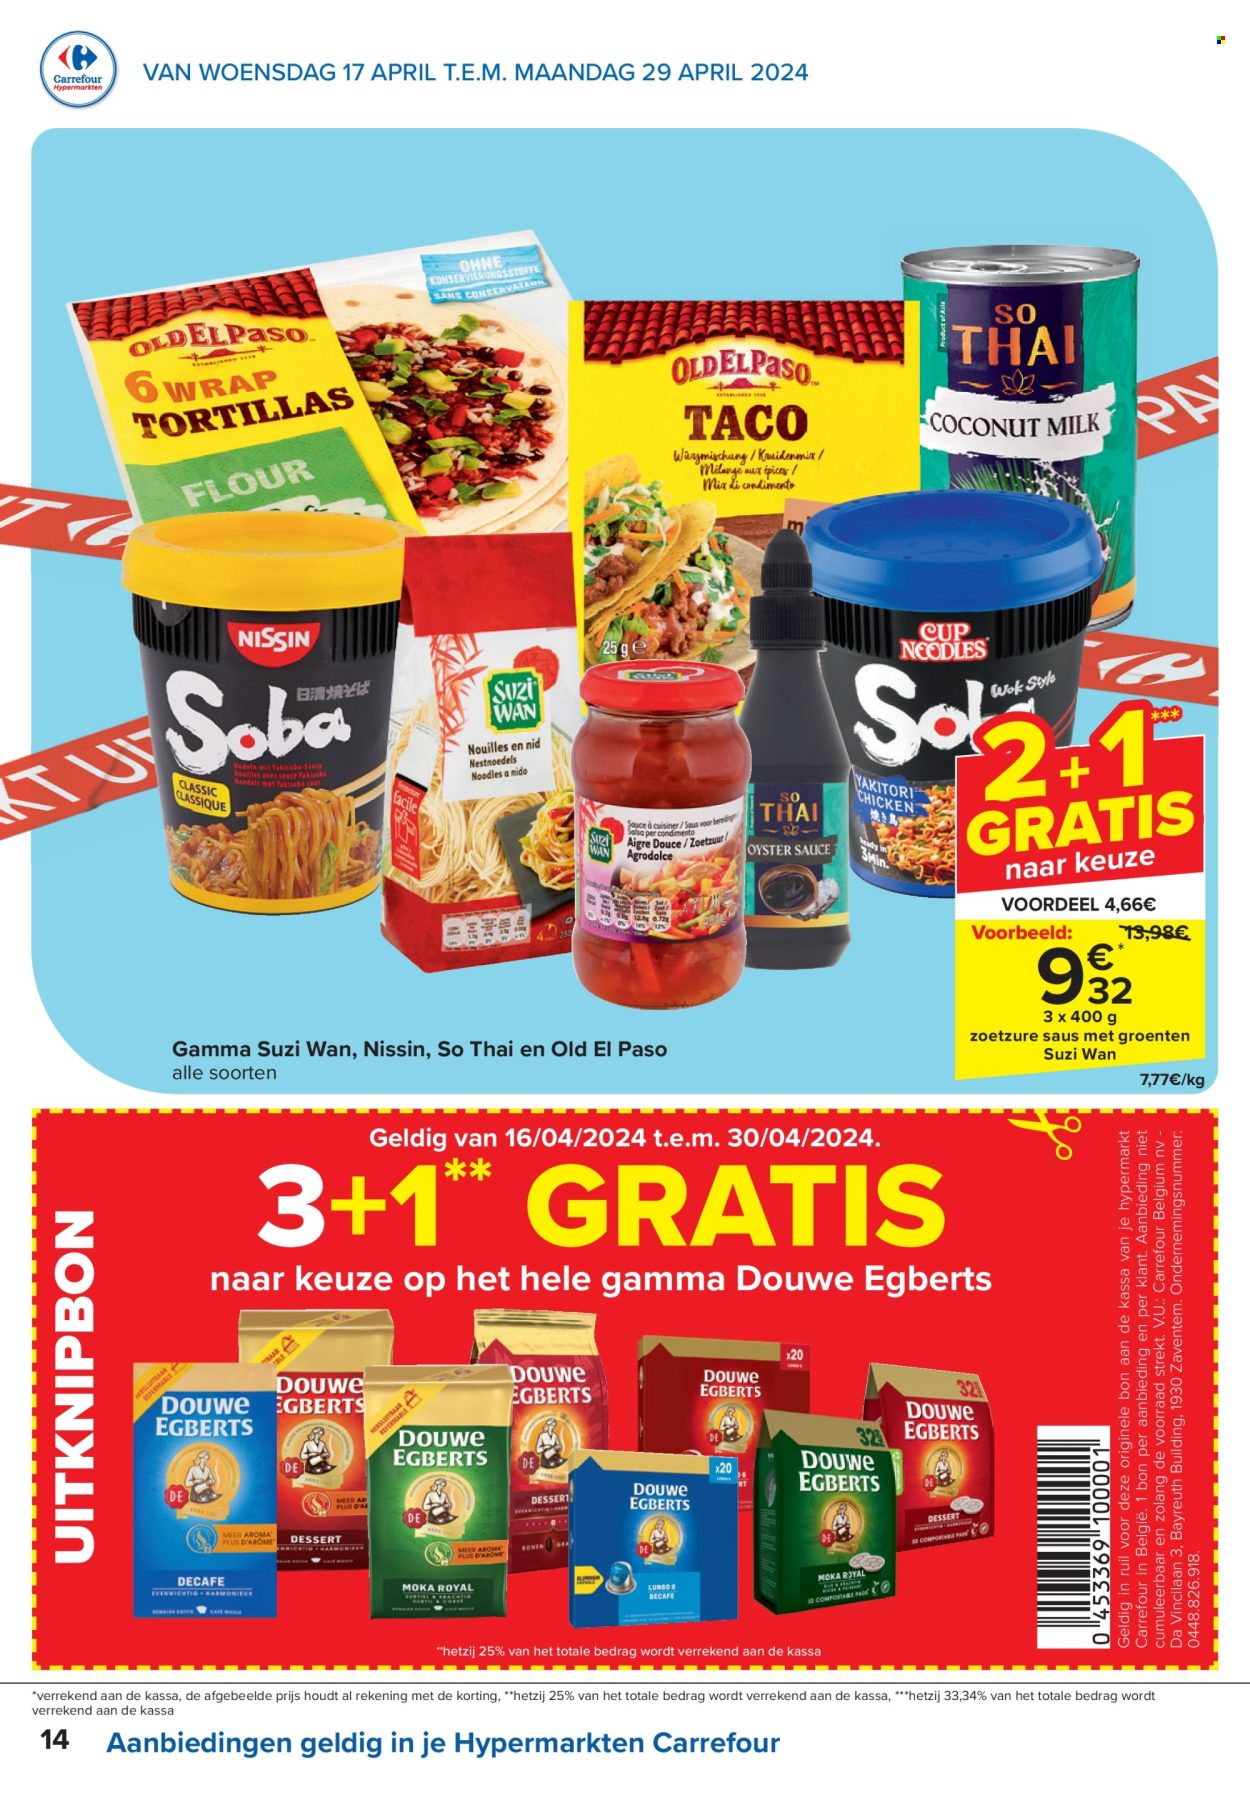 Catalogue Carrefour hypermarkt - 17.4.2024 - 29.4.2024. Page 14.